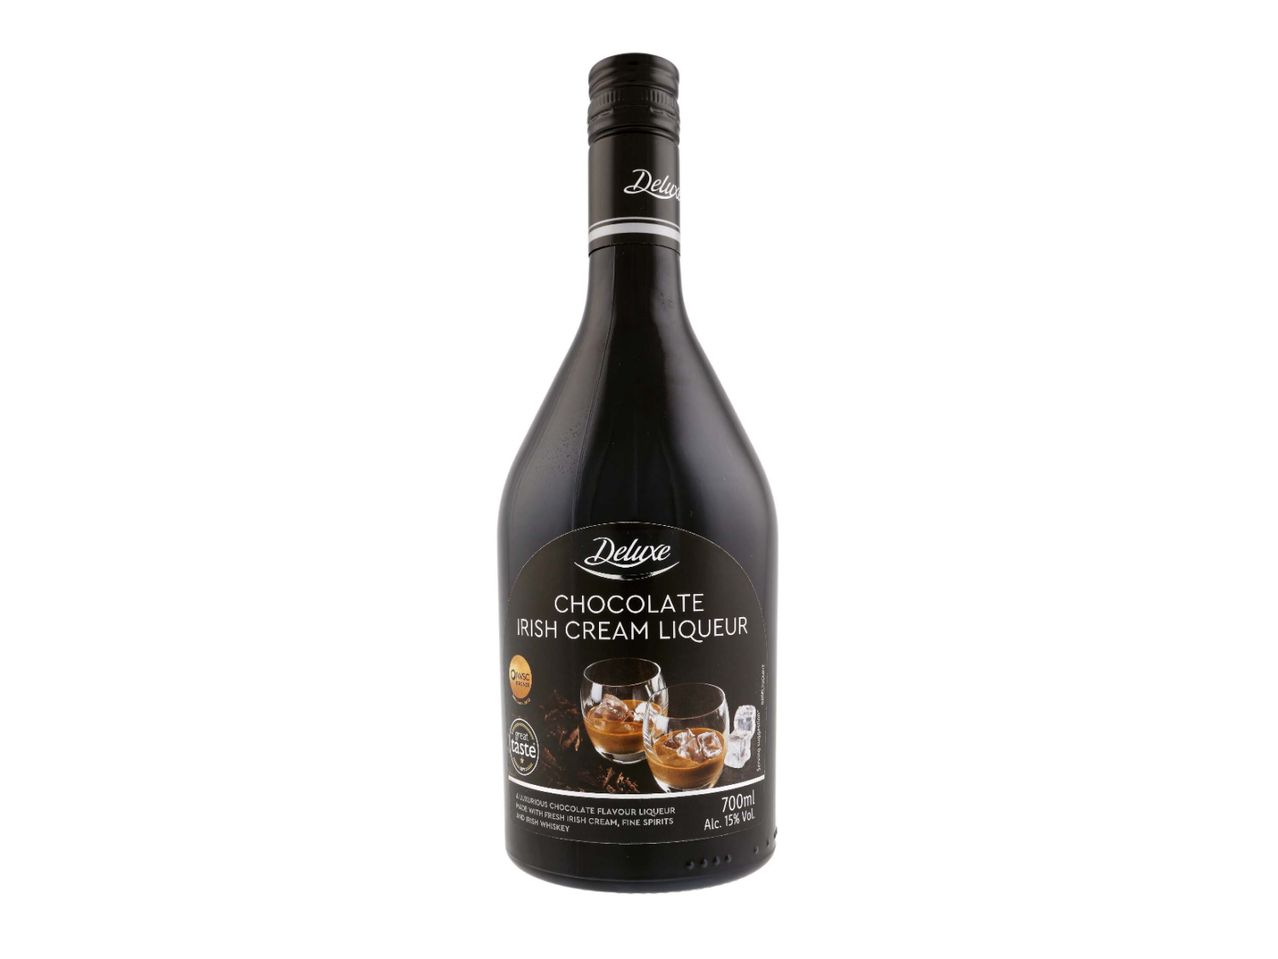 Go to full screen view: Deluxe Chocolate Cream Liqueur 15% - Image 1